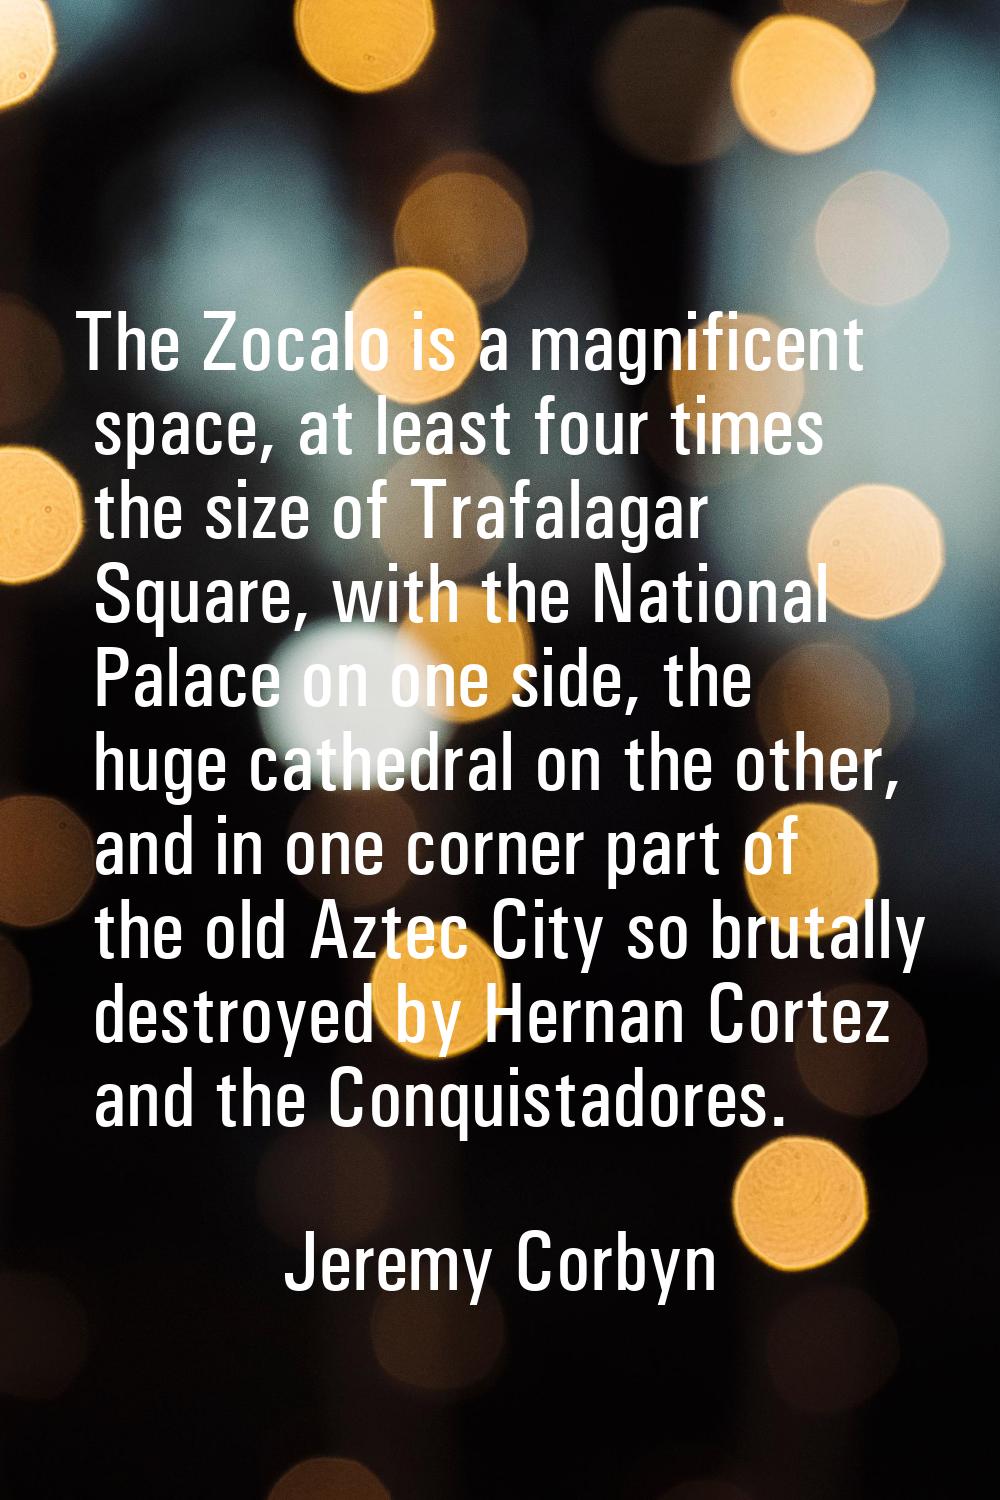 The Zocalo is a magnificent space, at least four times the size of Trafalagar Square, with the Nati